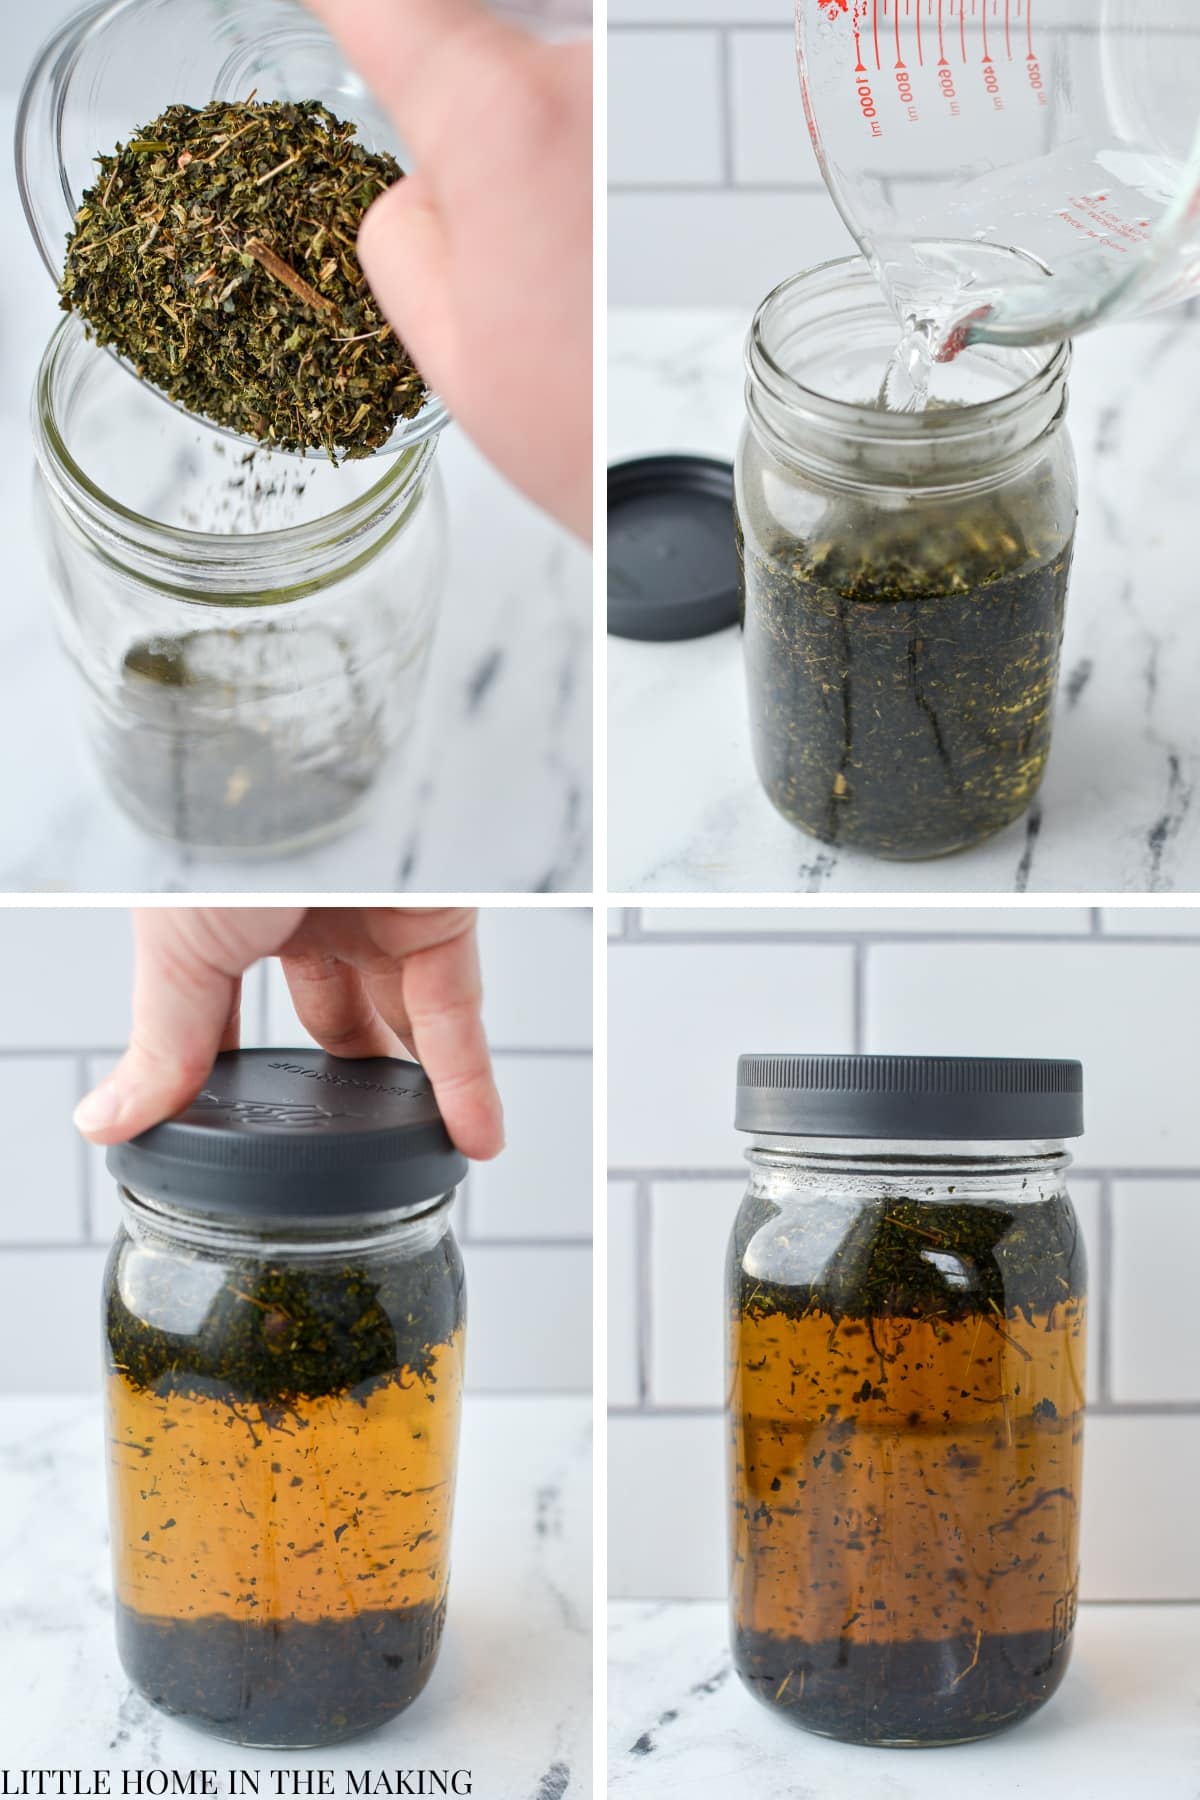 Adding water to dried herbs in a quart jar.